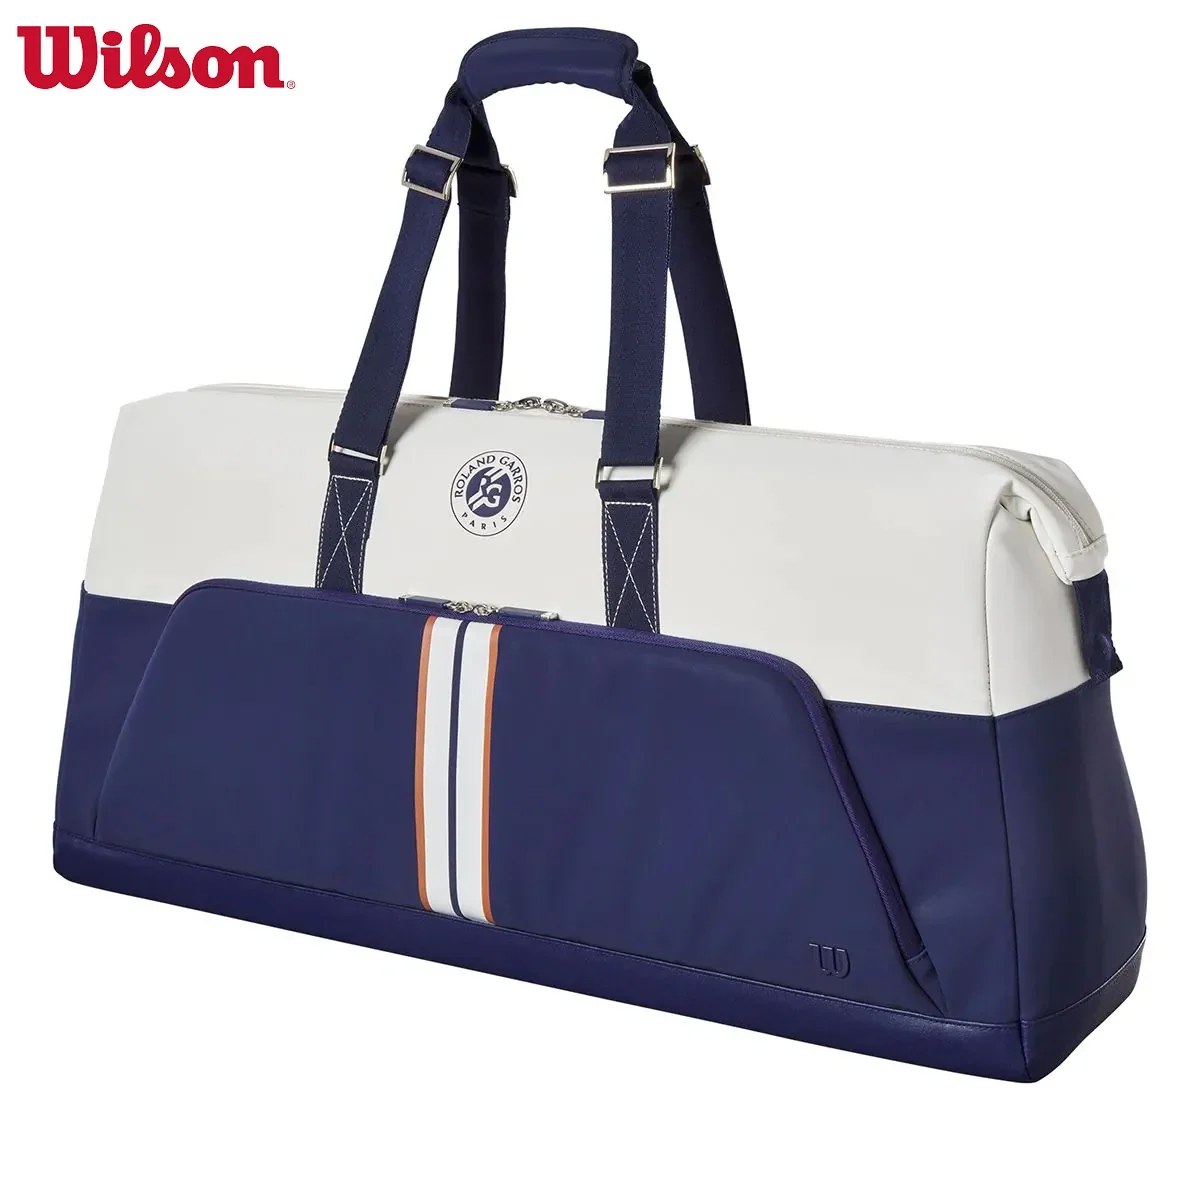 

Wilson 2023 Roland Garros Navy 4-6pcs Tennis Racket Bag Super Tour Nylon Large Tennis Bag for 5 Racquets With Two Compartment